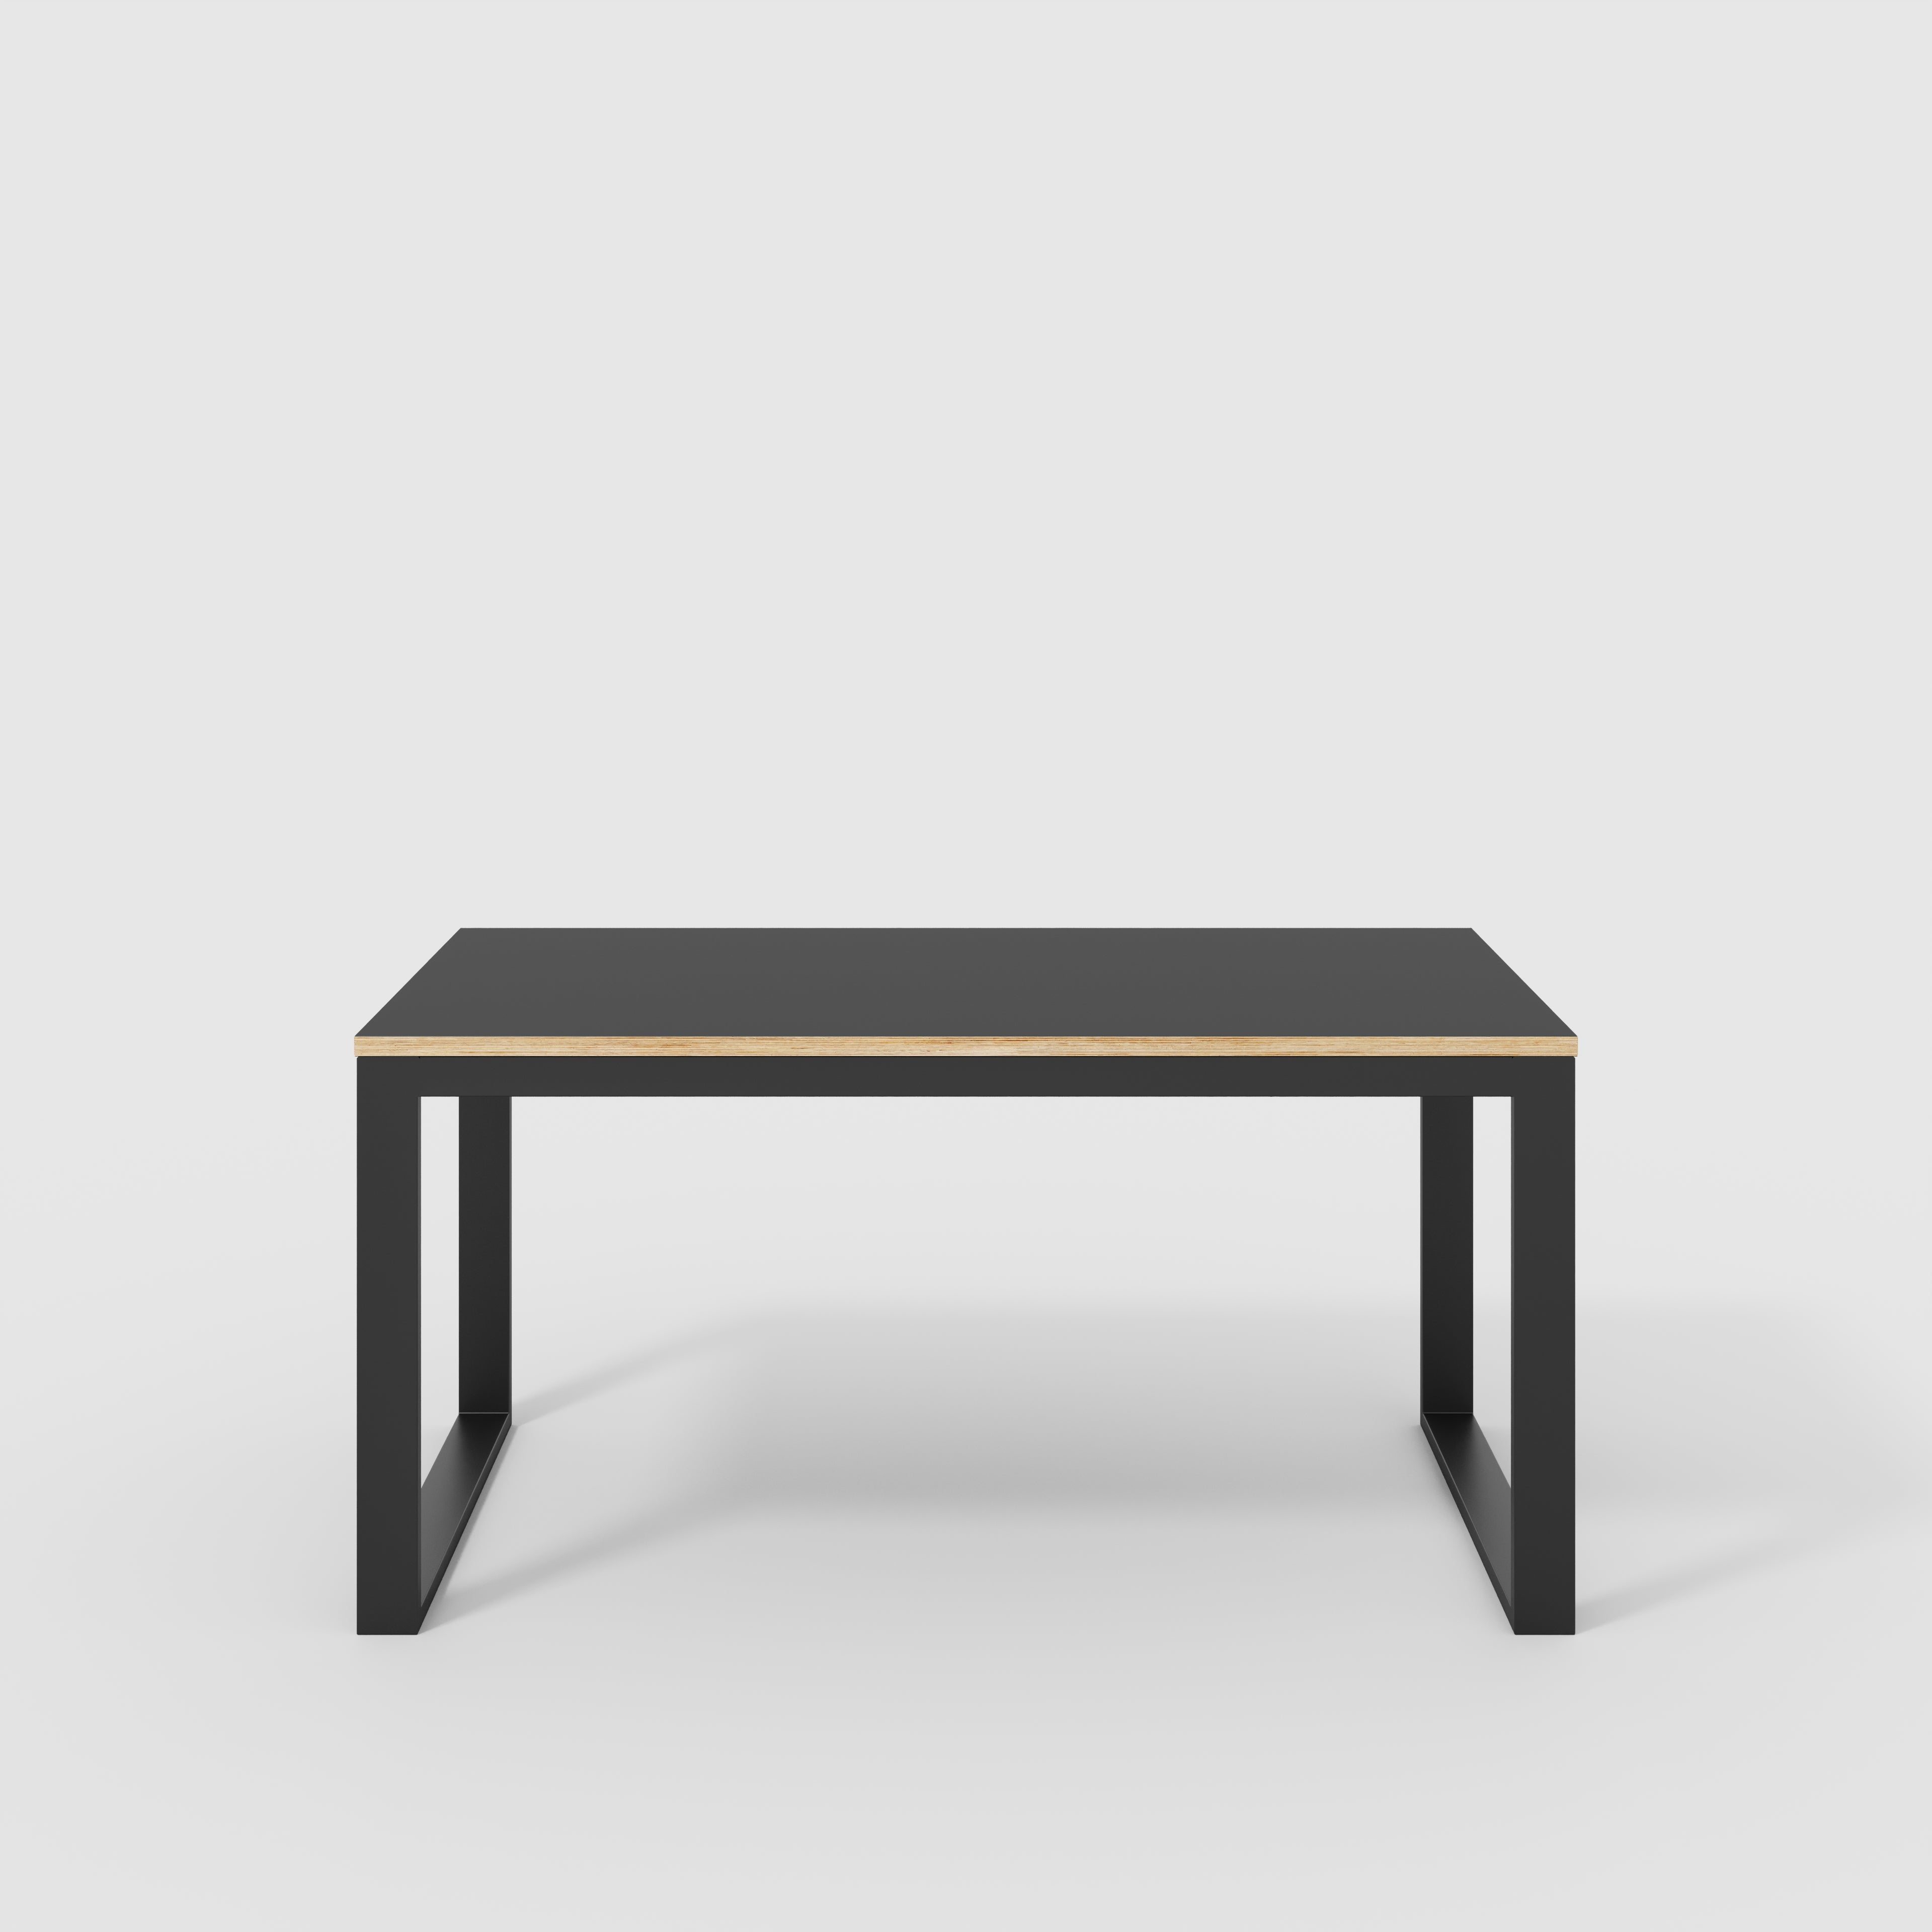 Table with Black Industrial Frame - Formica Diamond Black - 1500(w) x 745(d) x 735(h)